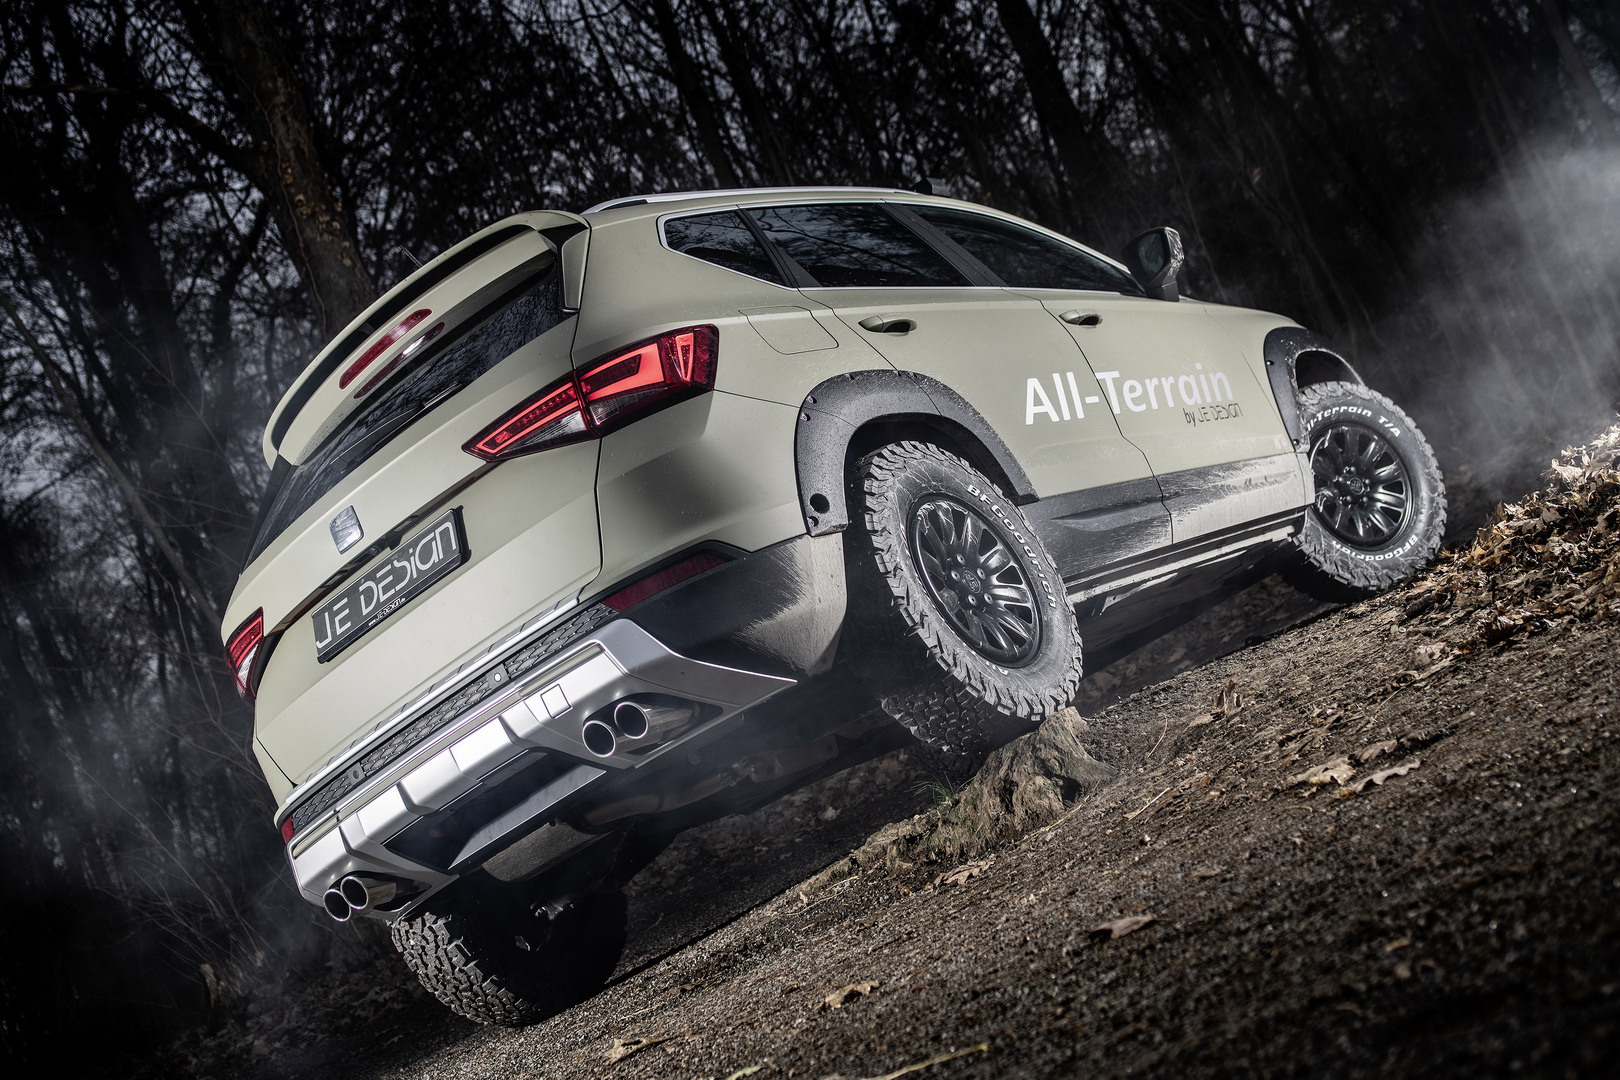 JE Design’s ‘All Terrain’ Wants To Go Where No Other Seat Ateca Has ...